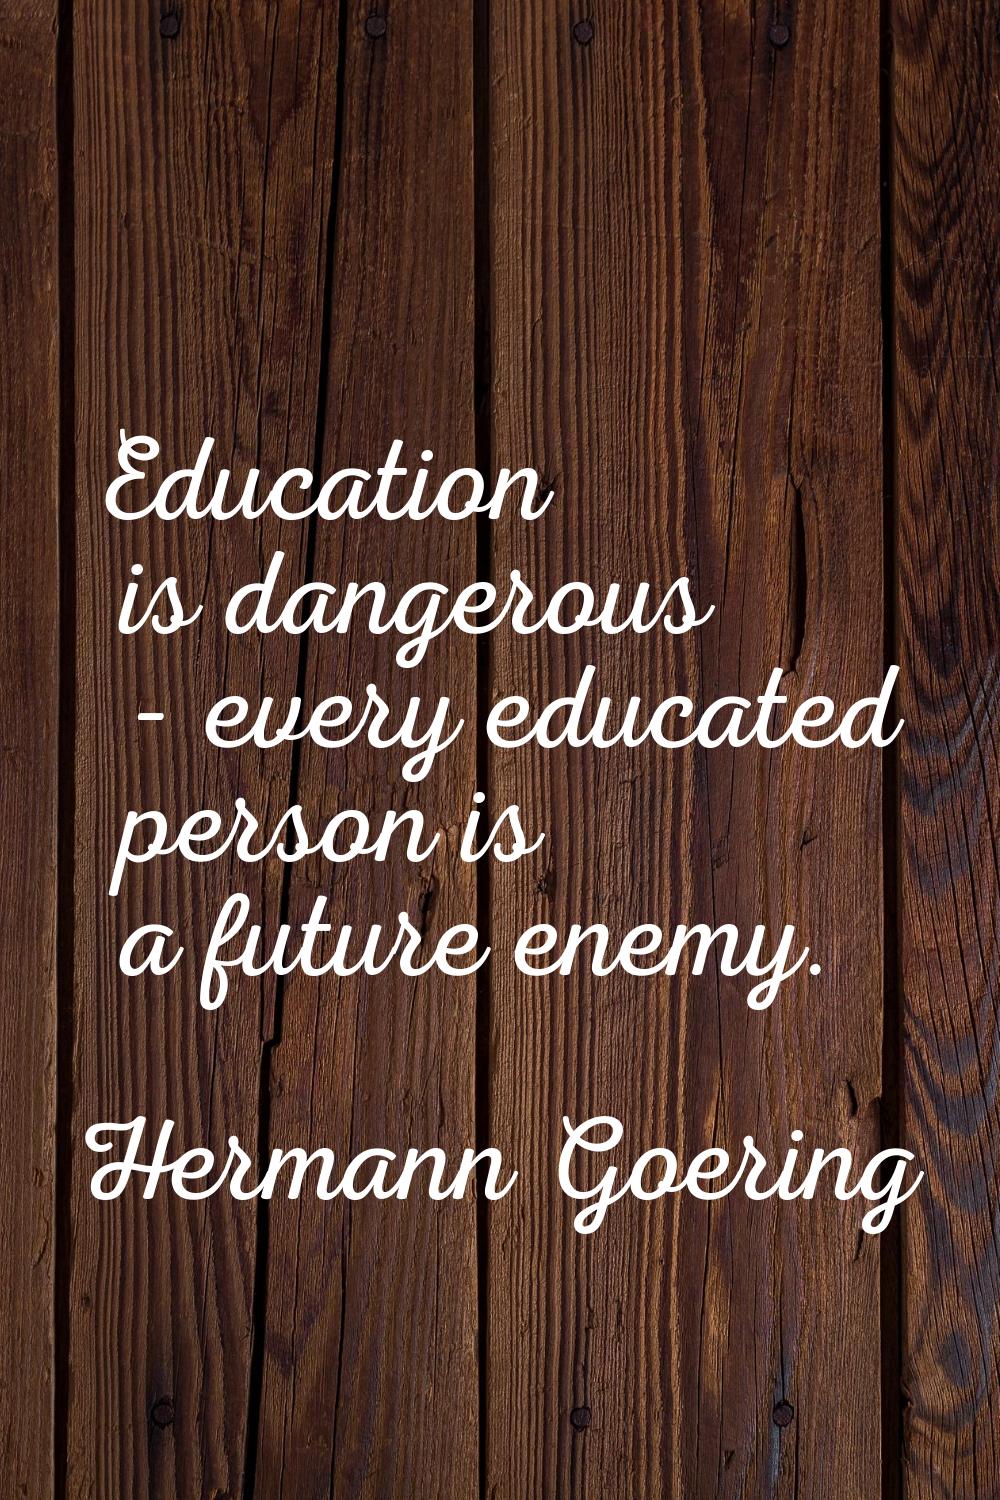 Education is dangerous - every educated person is a future enemy.